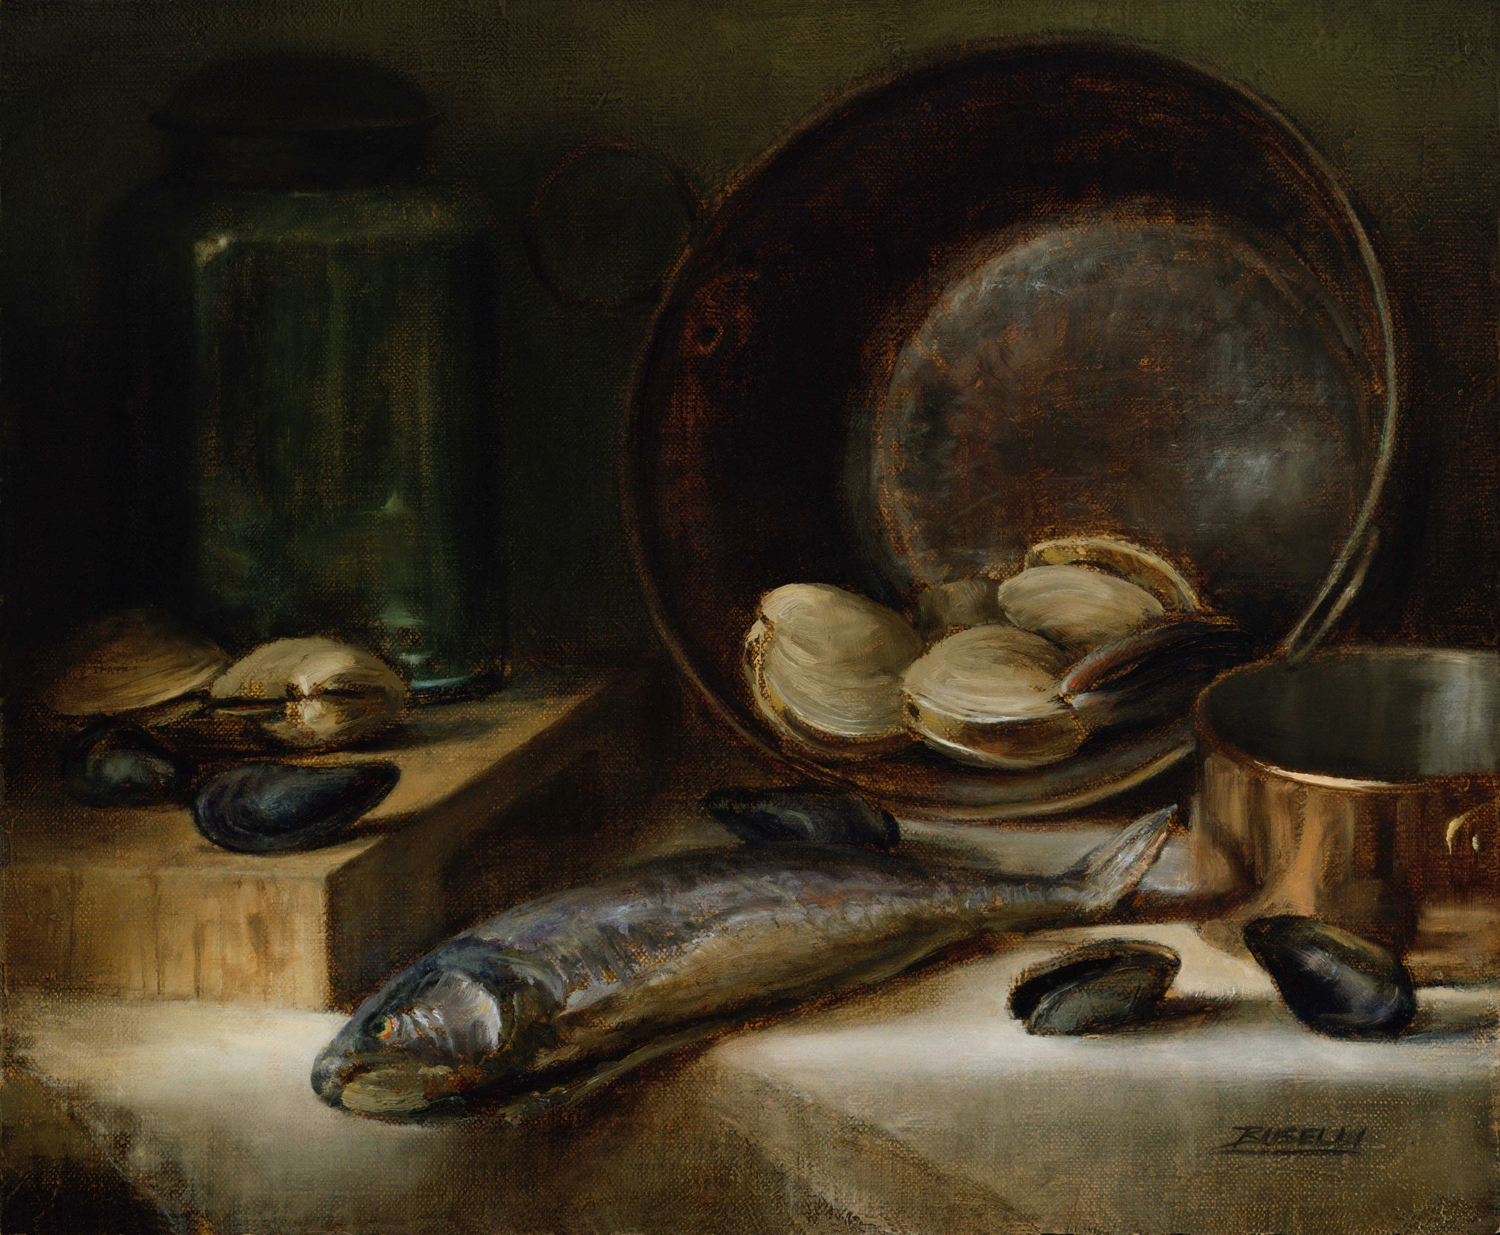   TROUT &amp; SHELLFISH   oil on linen 15" x 18"   